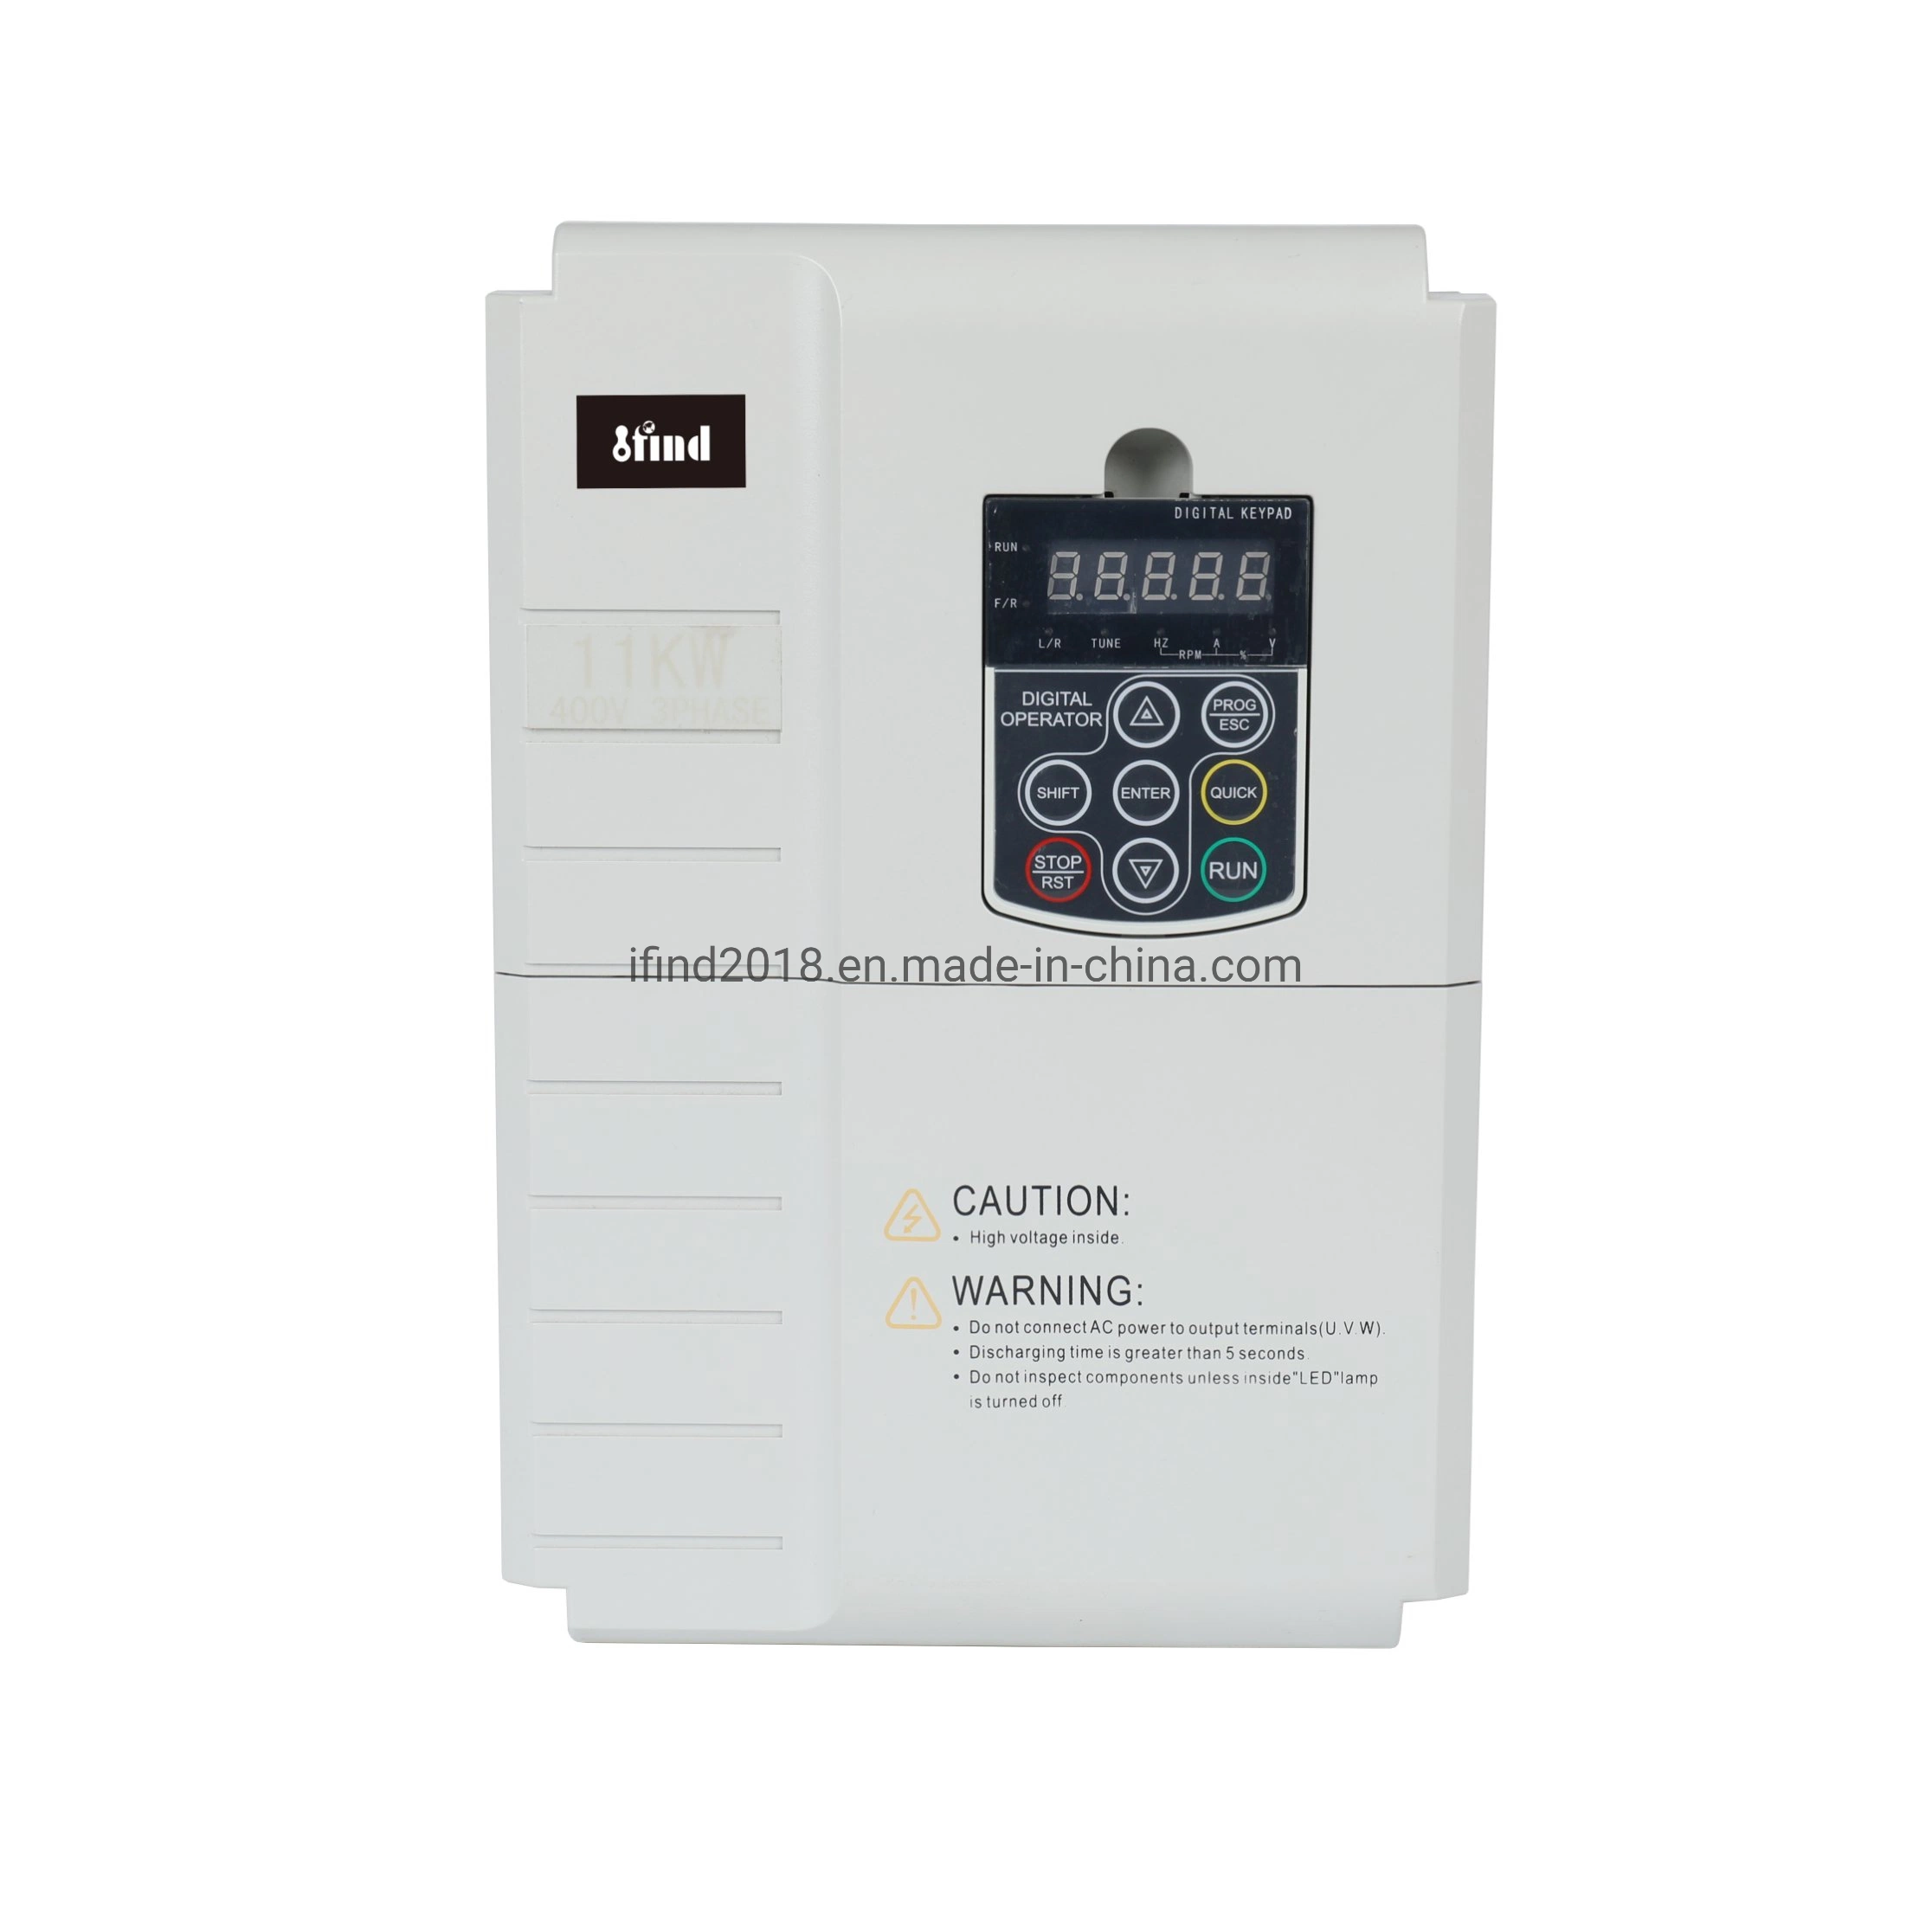 Elevator Lifts Power Saver Electronic Inverter VFD Variable Frequency Drive Speed Controller